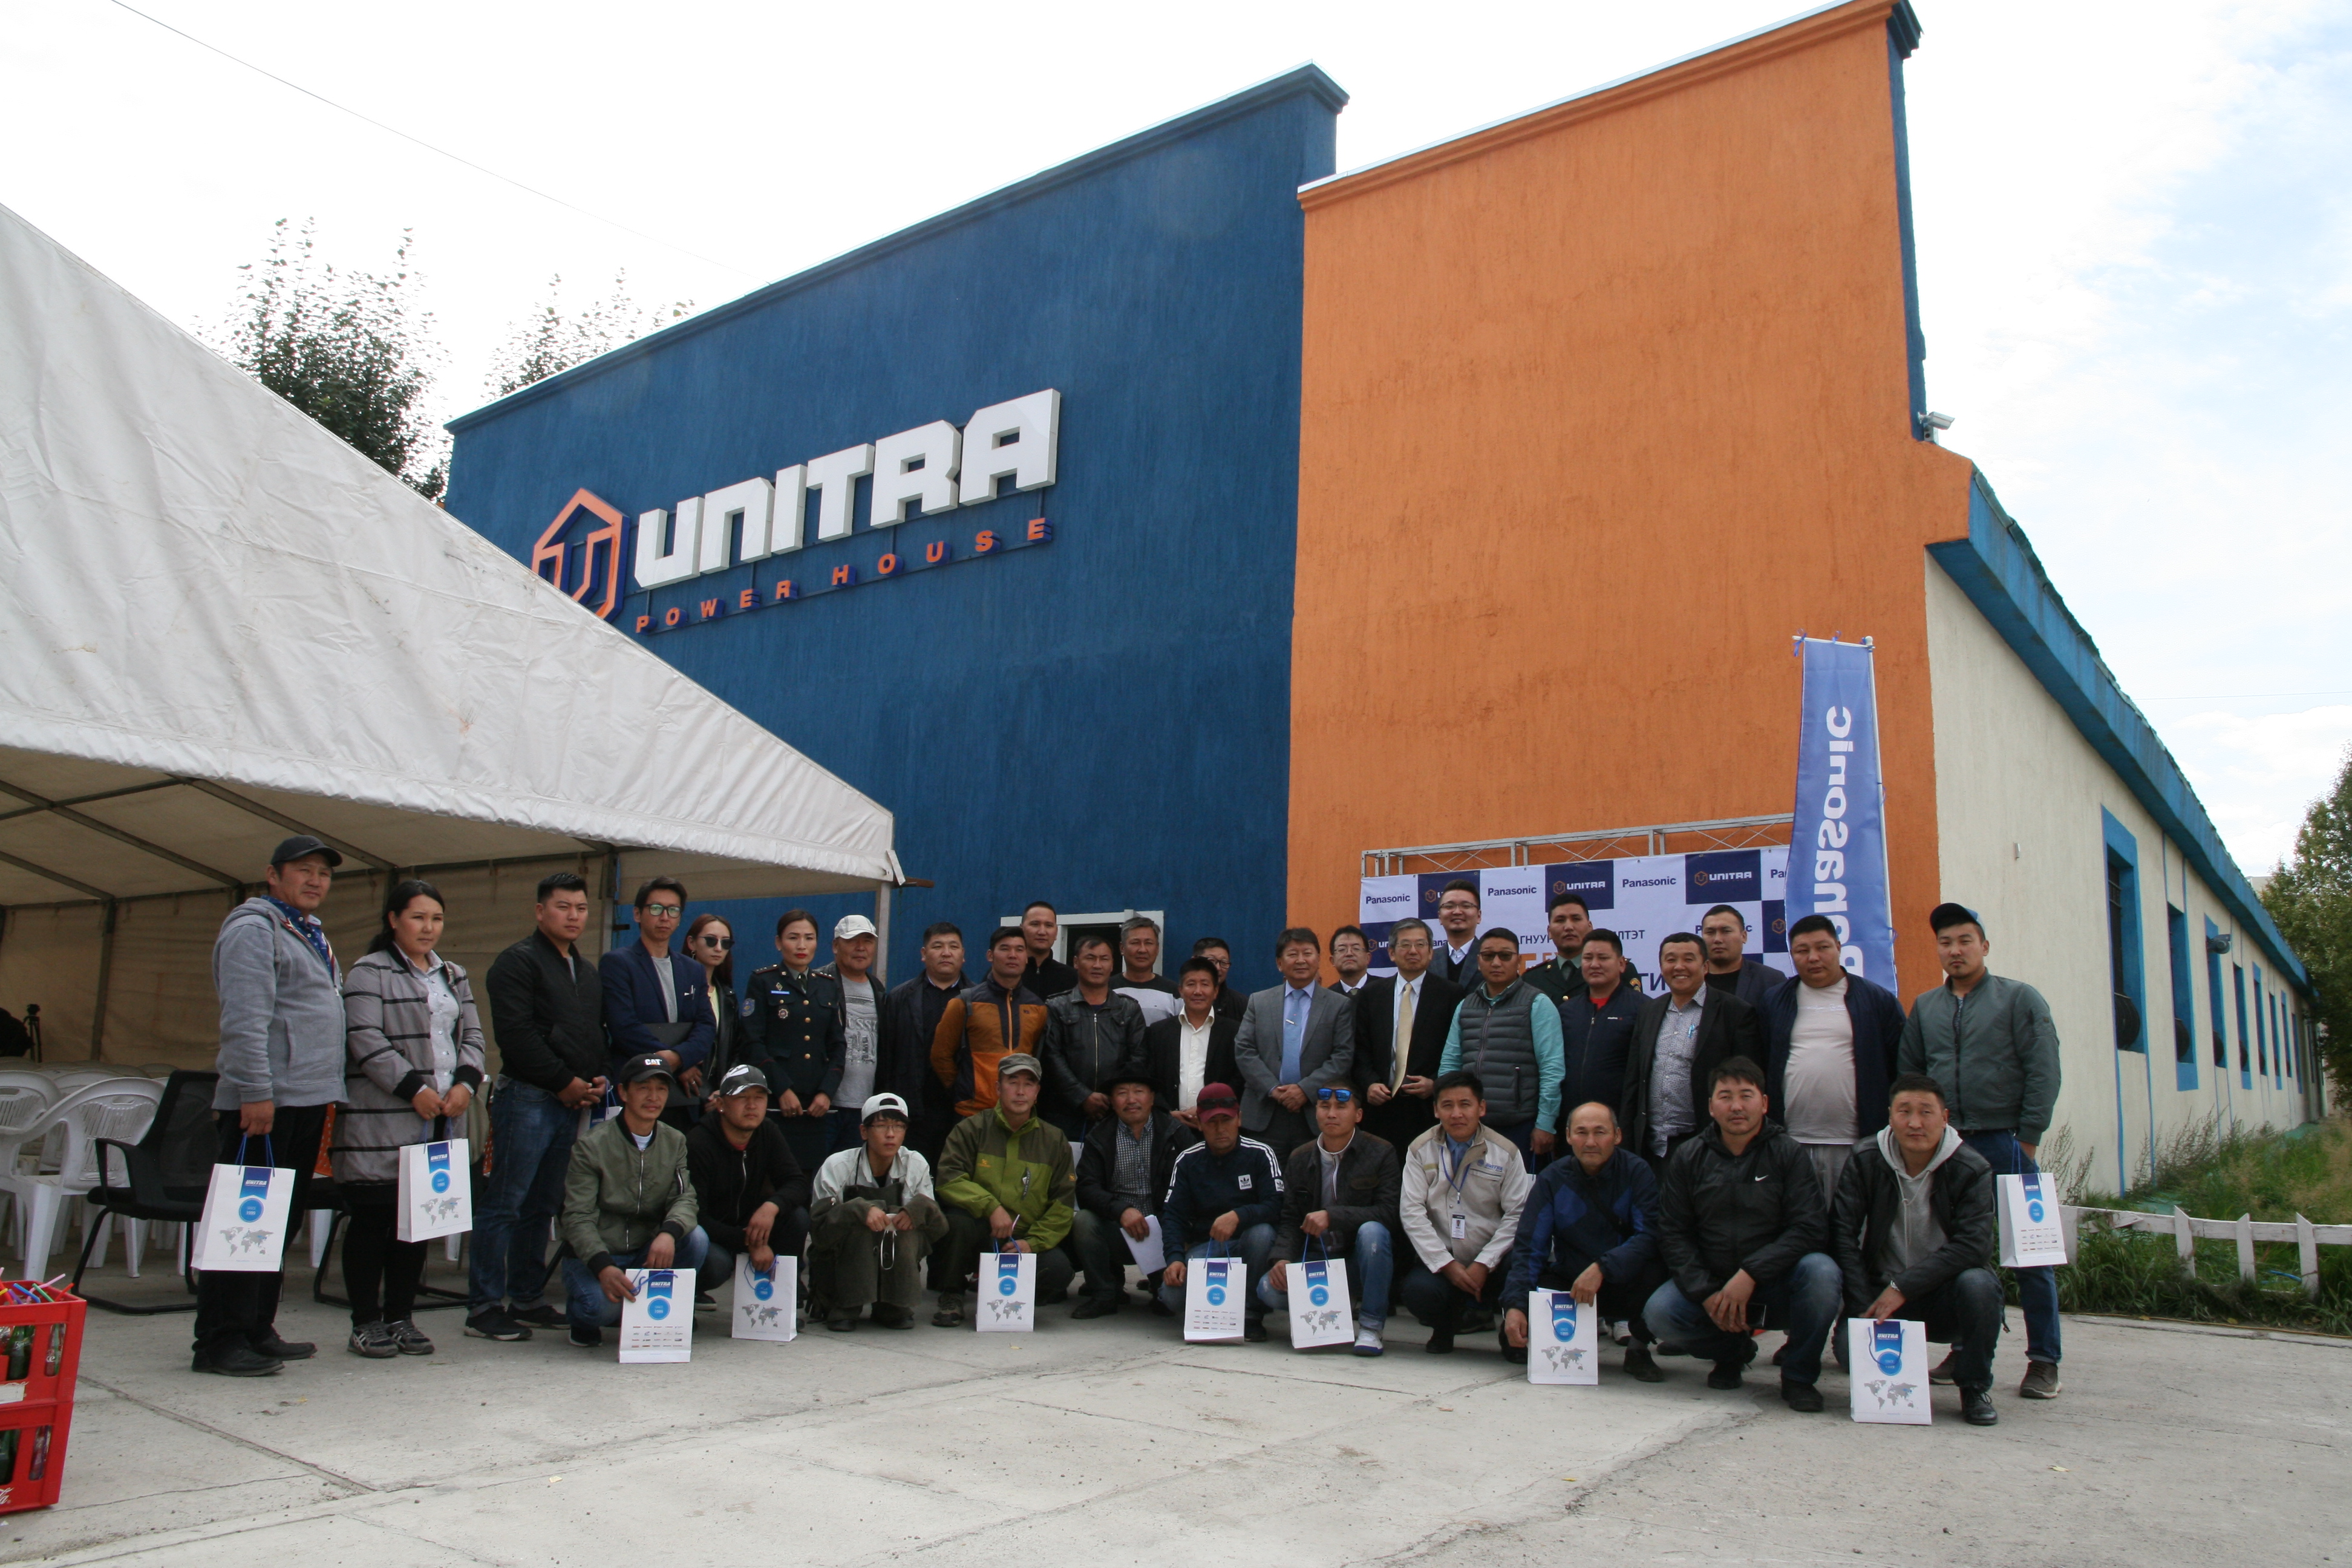 Unitra has successfully organized a welding day event in cooperation with Panasonic Corporation...